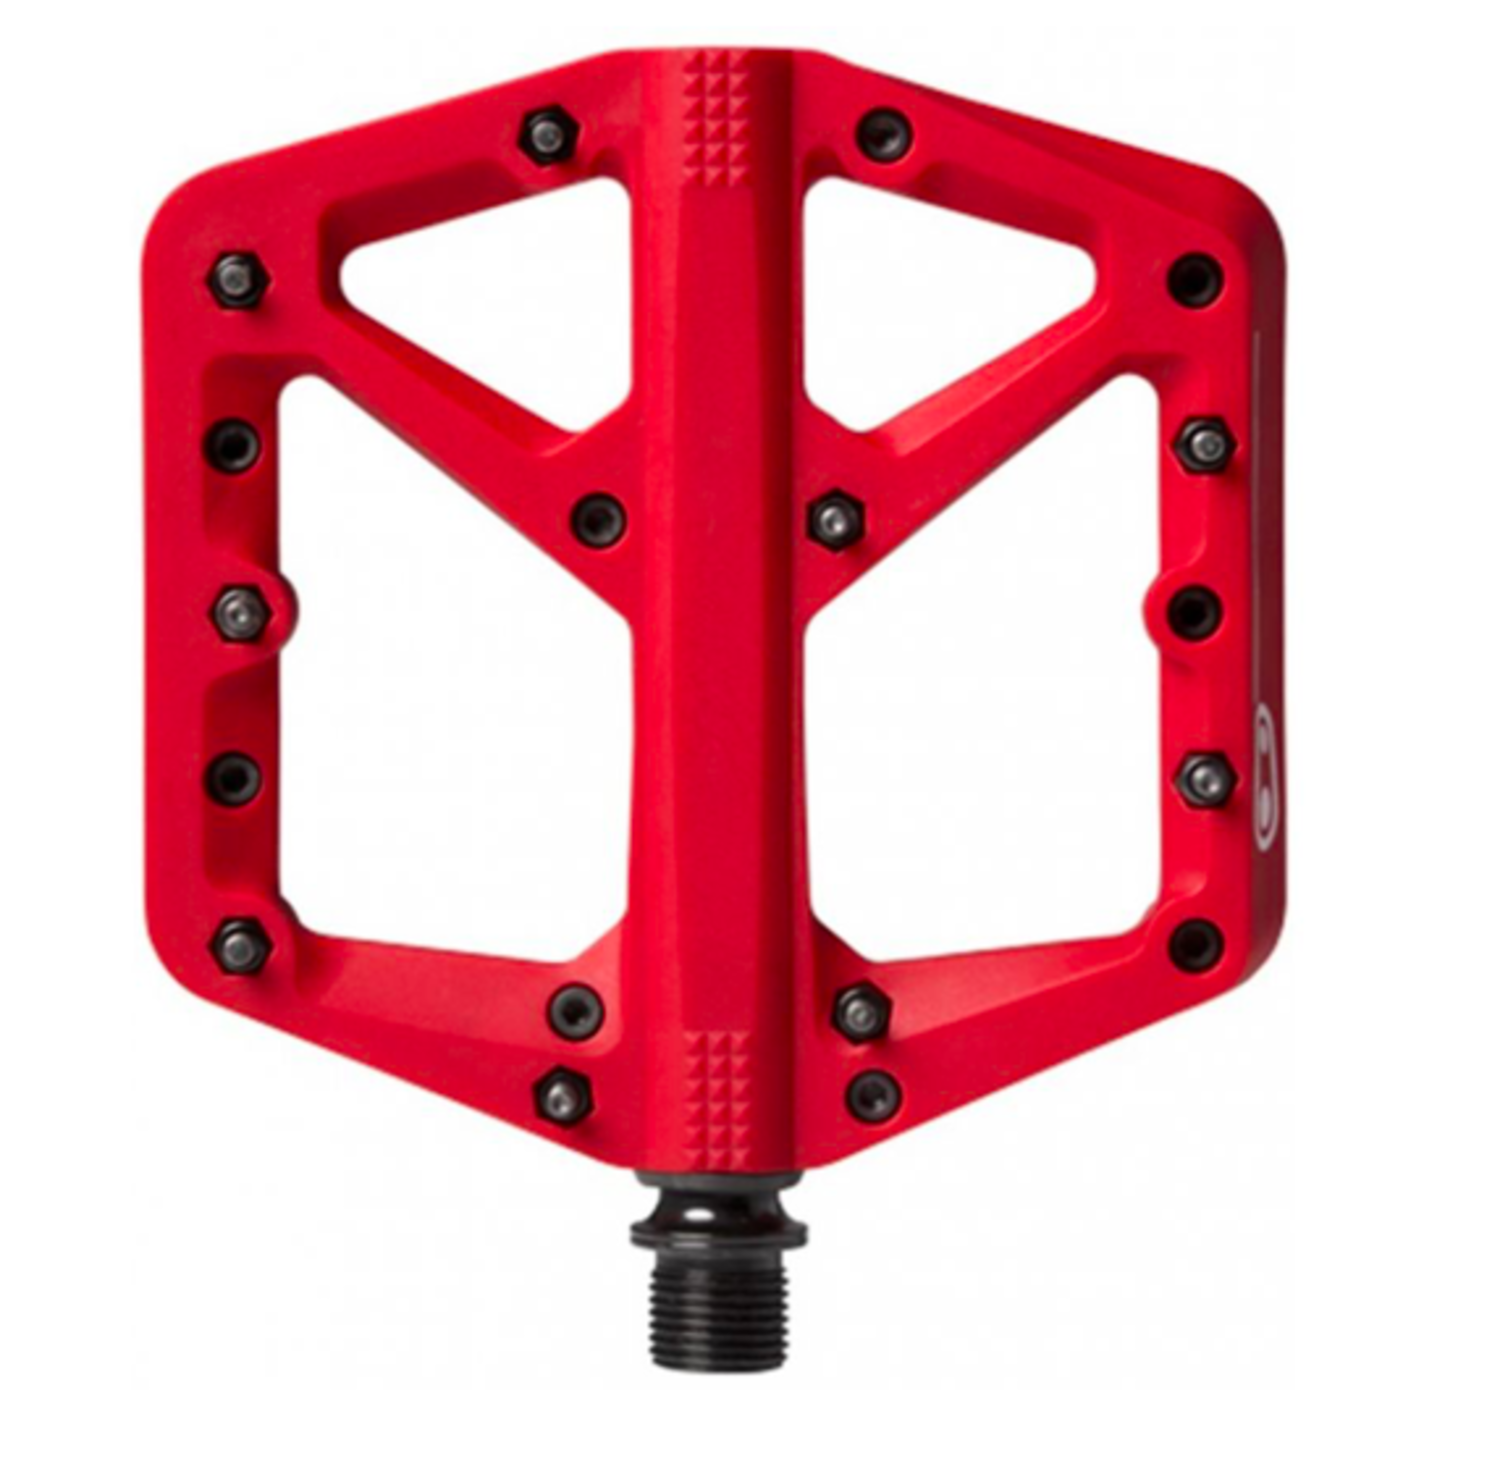 Brothers Stamp 1 Pedals Large - Red - Cycle House